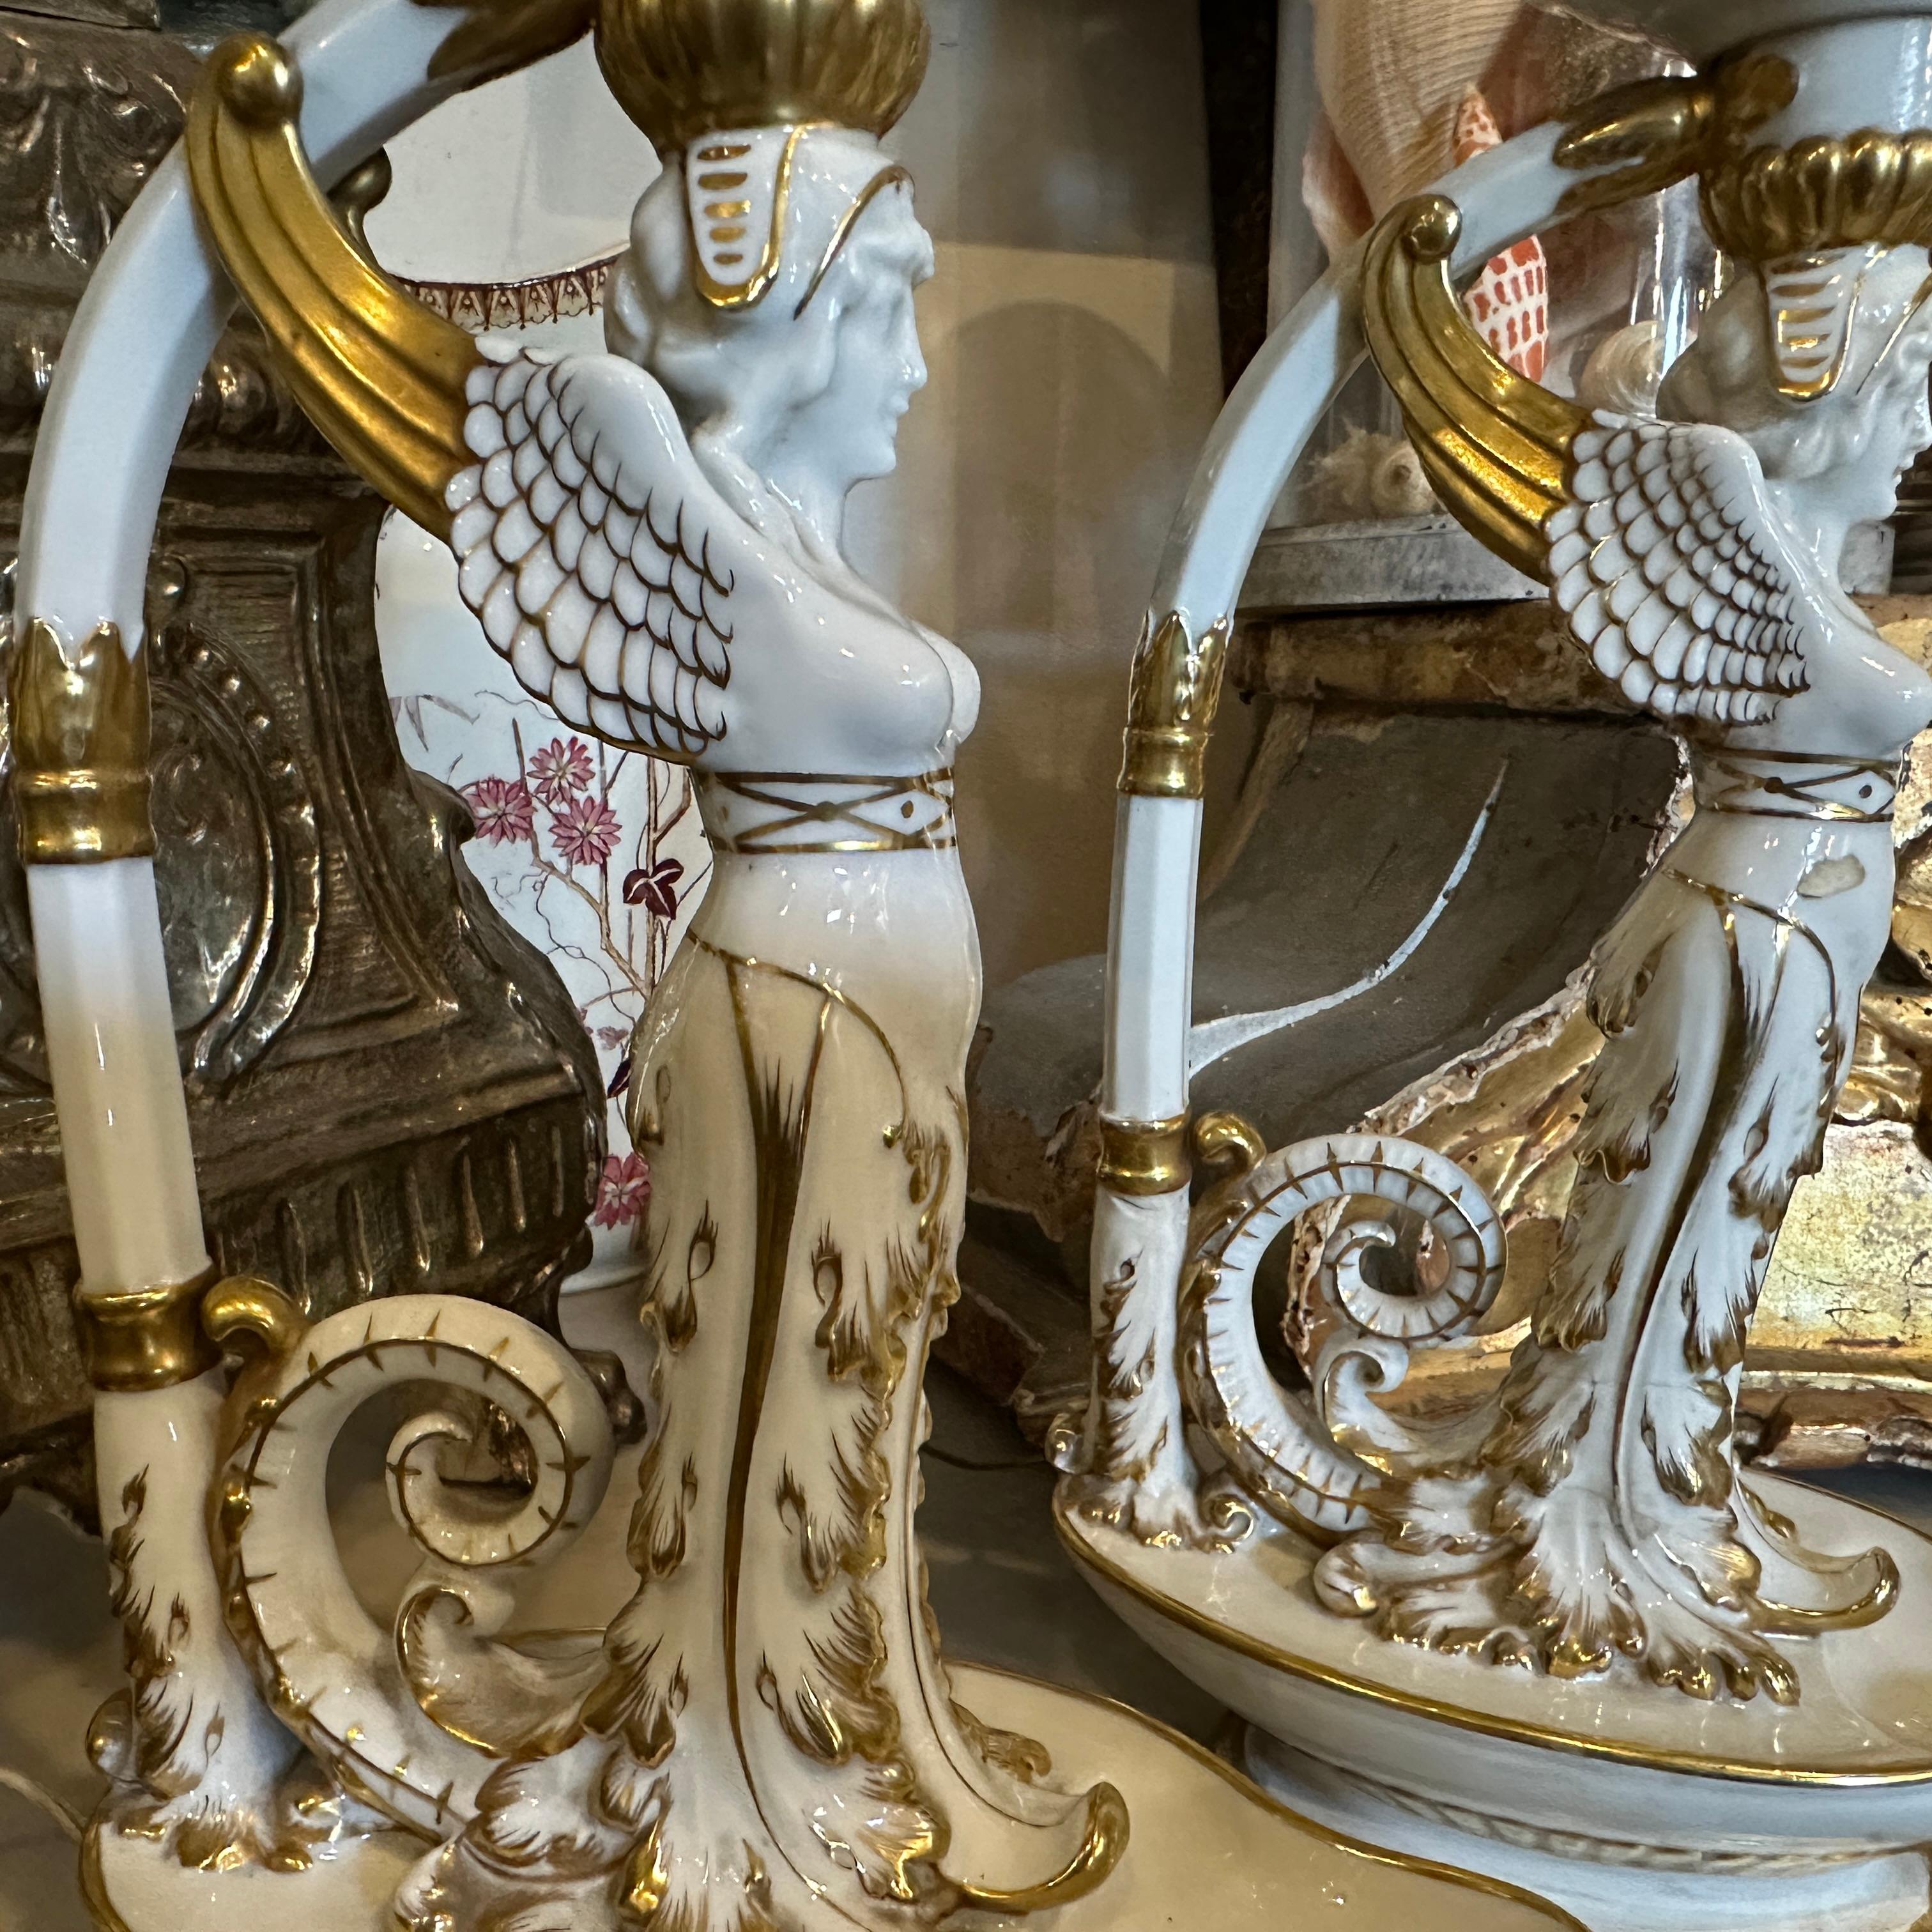 Early 20th Century 1900s Set of Two Neoclassical White and Gold Capodimonte Porcelain Table Lamps For Sale